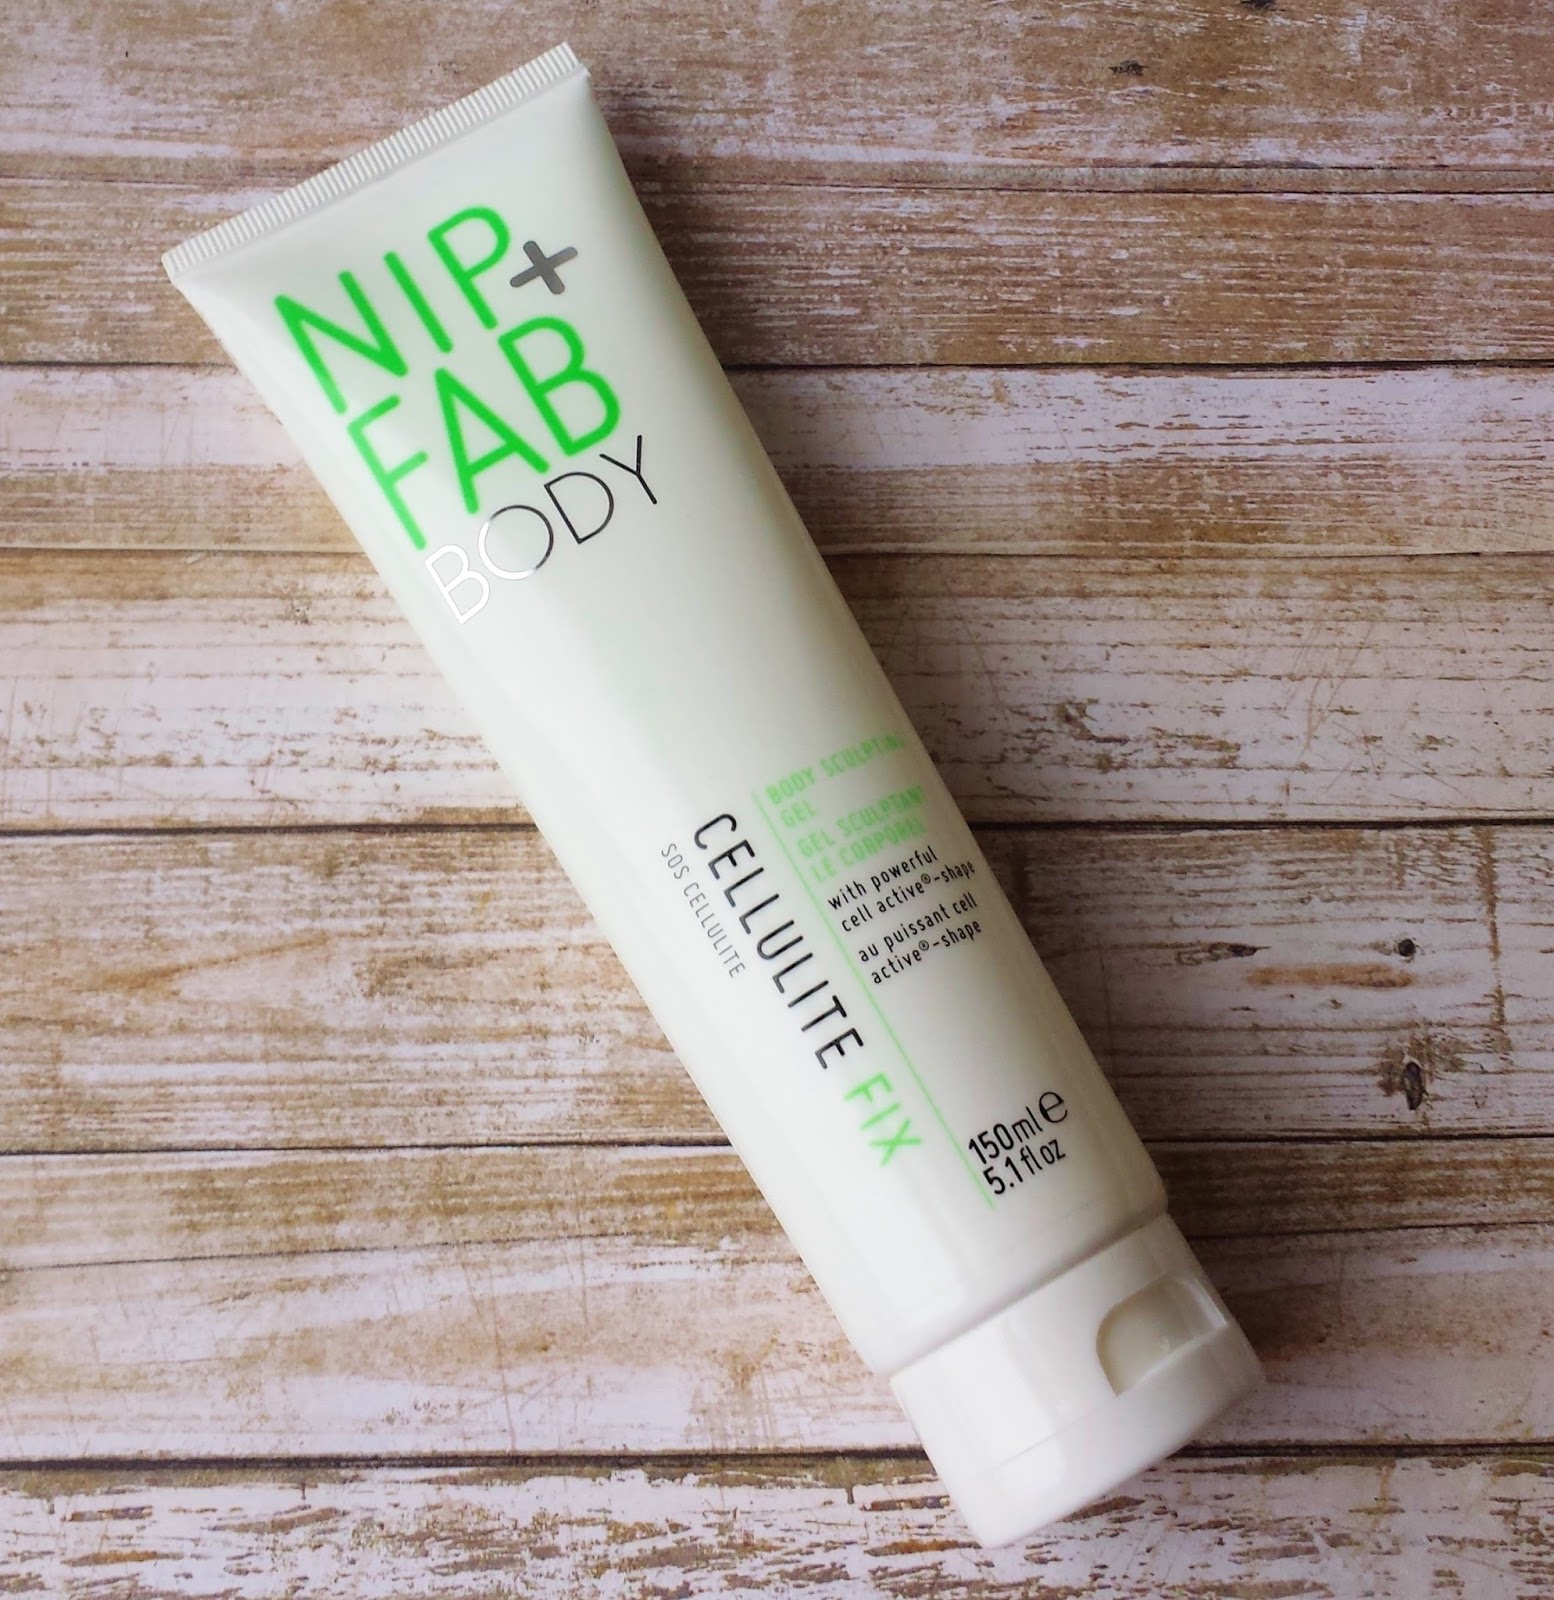 a review of Nip+Fab products